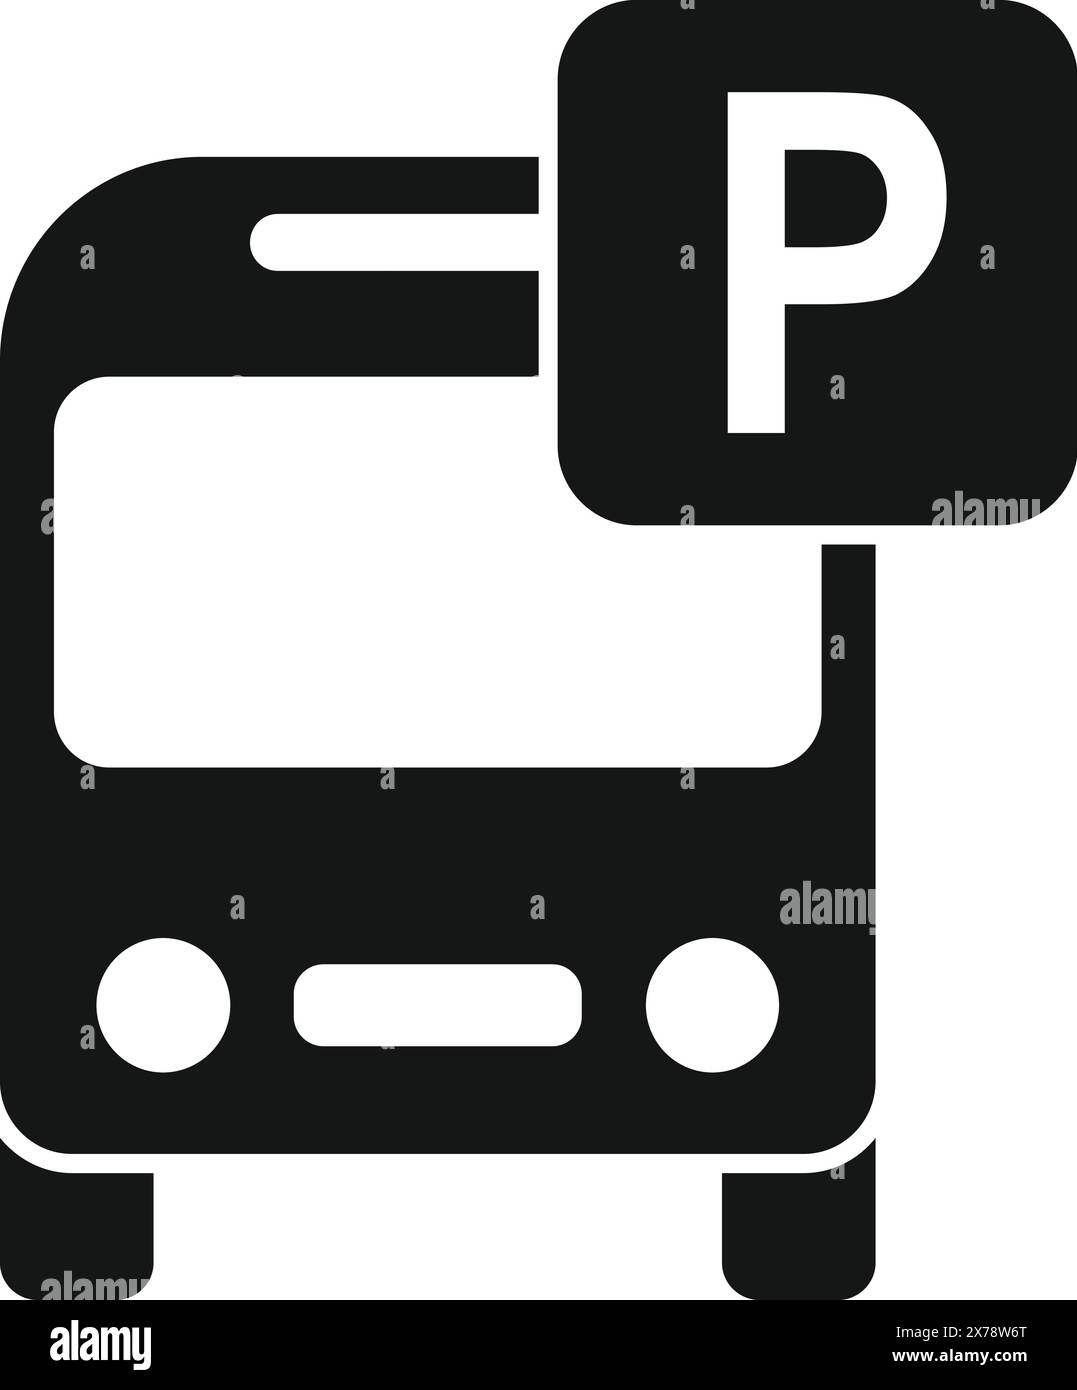 Simple and minimalistic bus parking sign icon for public transportation vector illustration and graphic design. Black and white symbol for easy navigation and clear information in urban areas Stock Vector